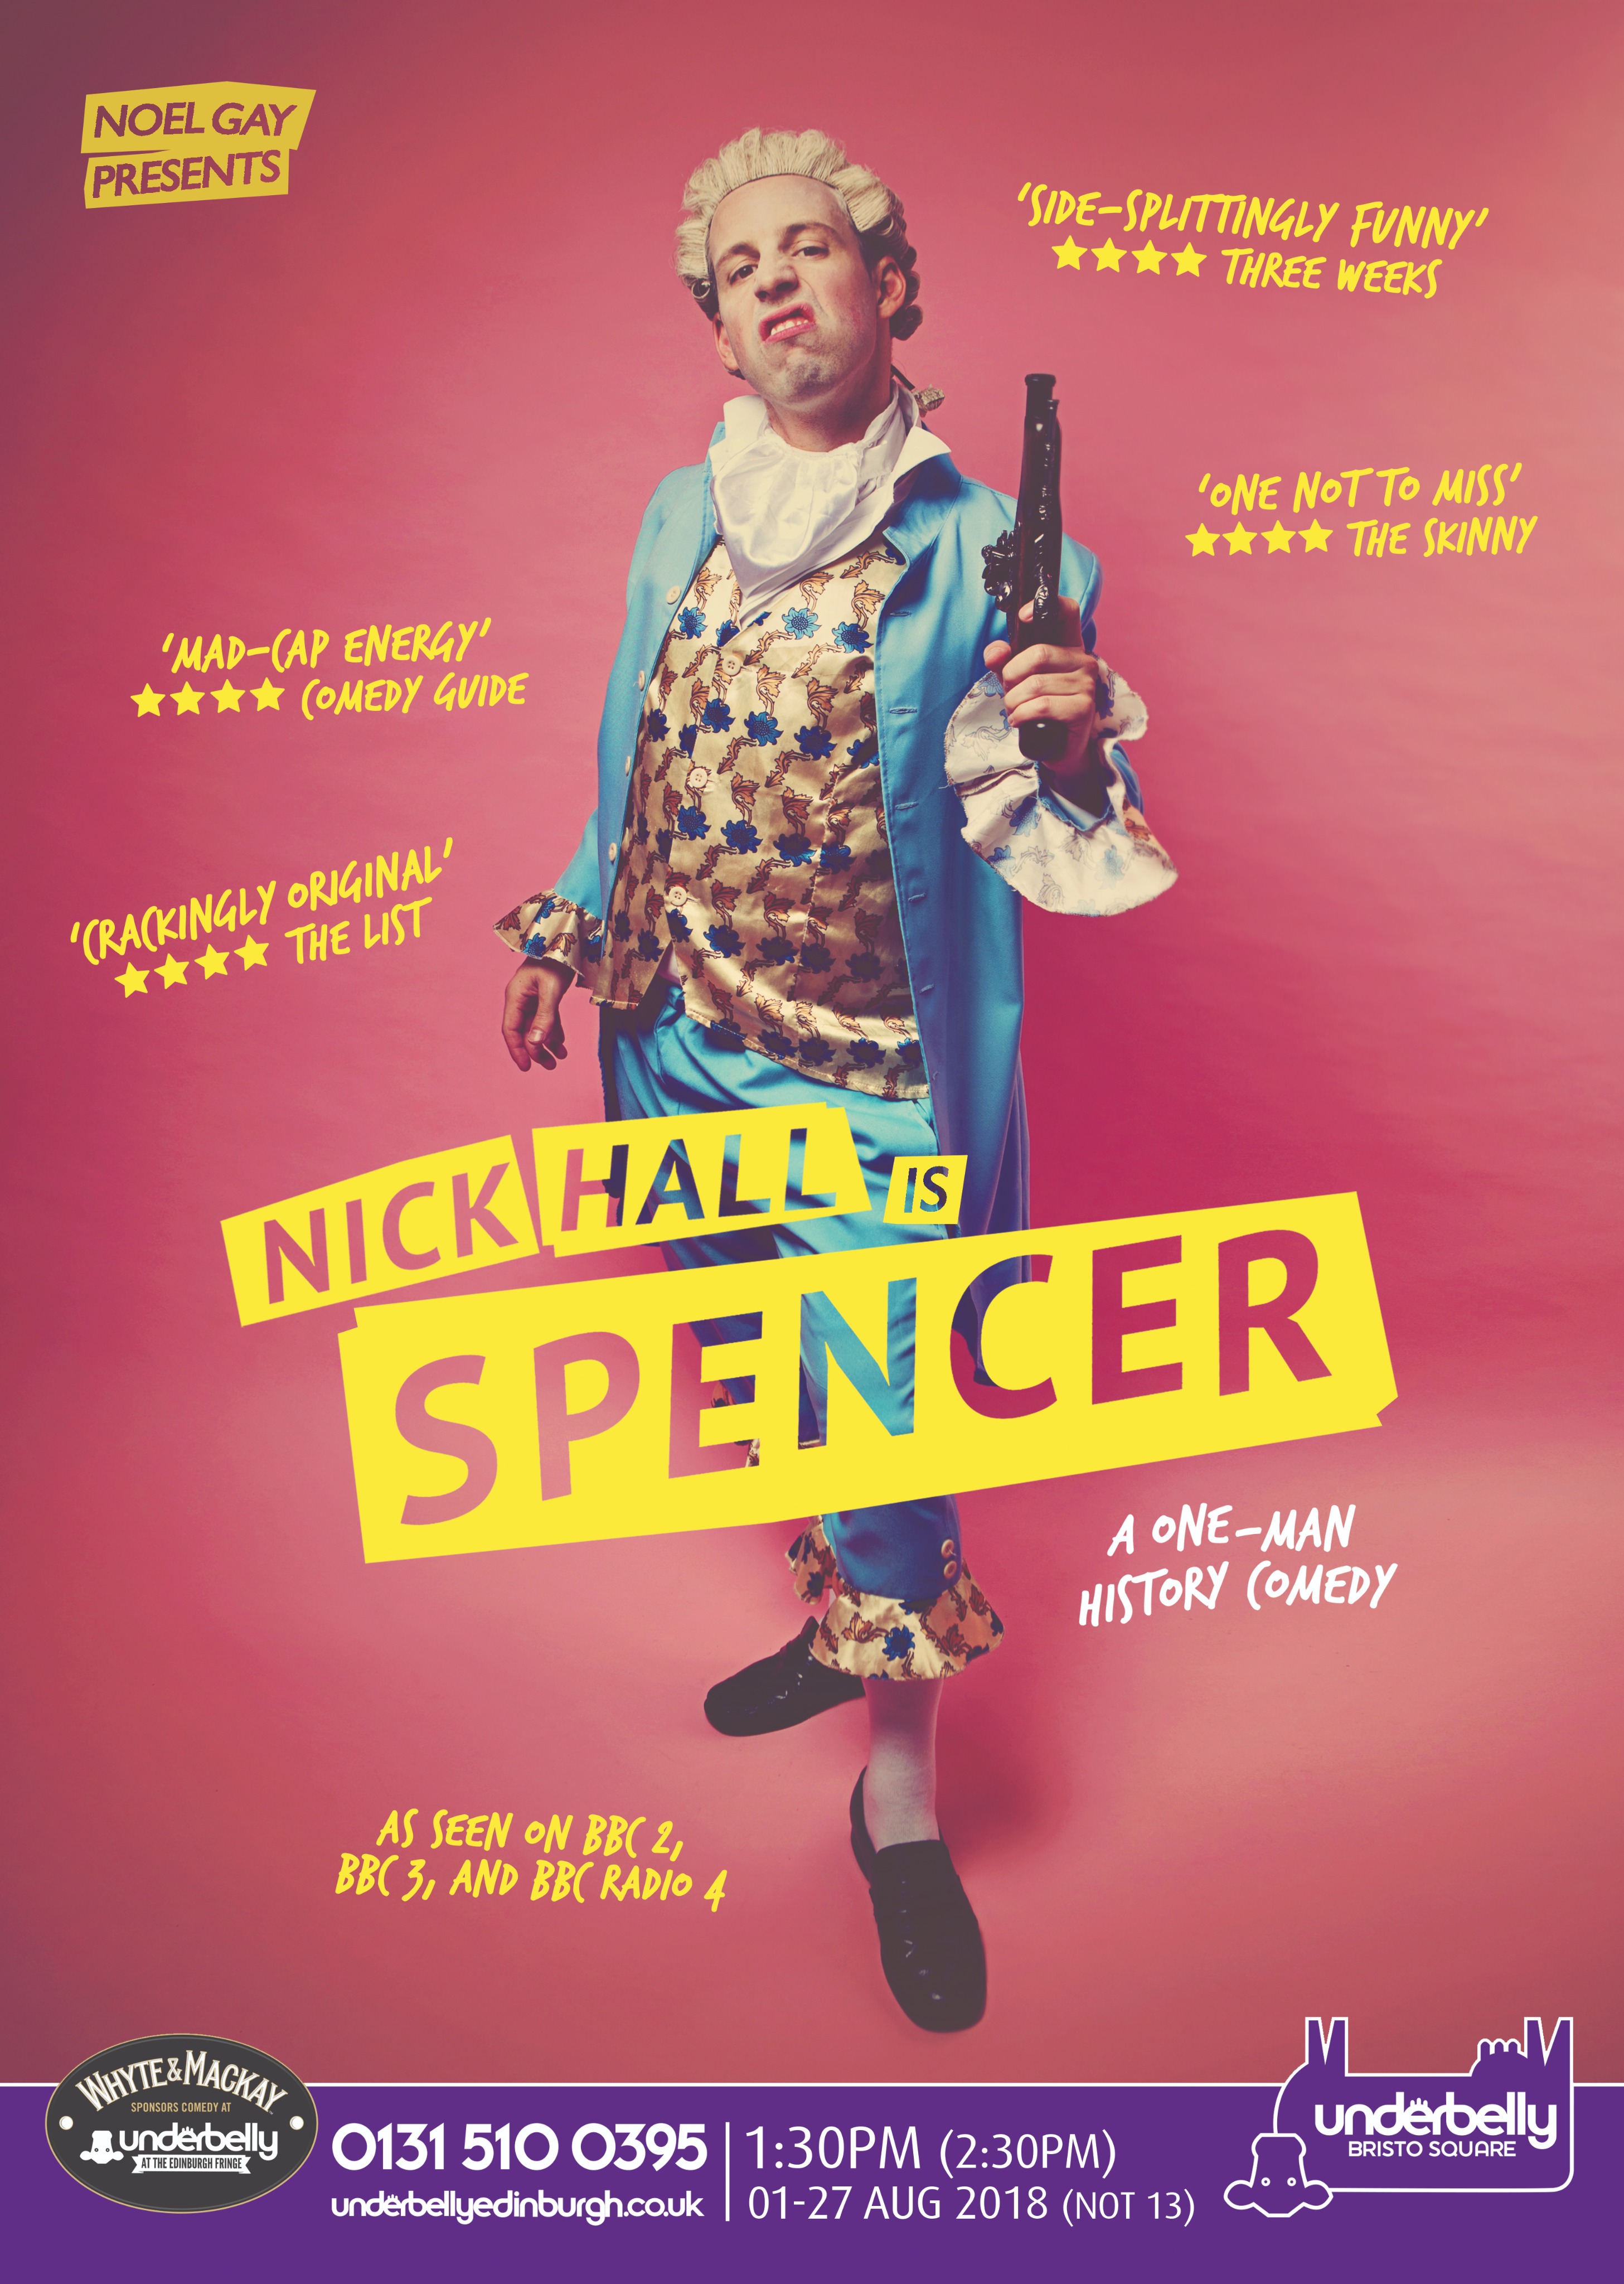 The poster for Nick Hall: Spencer